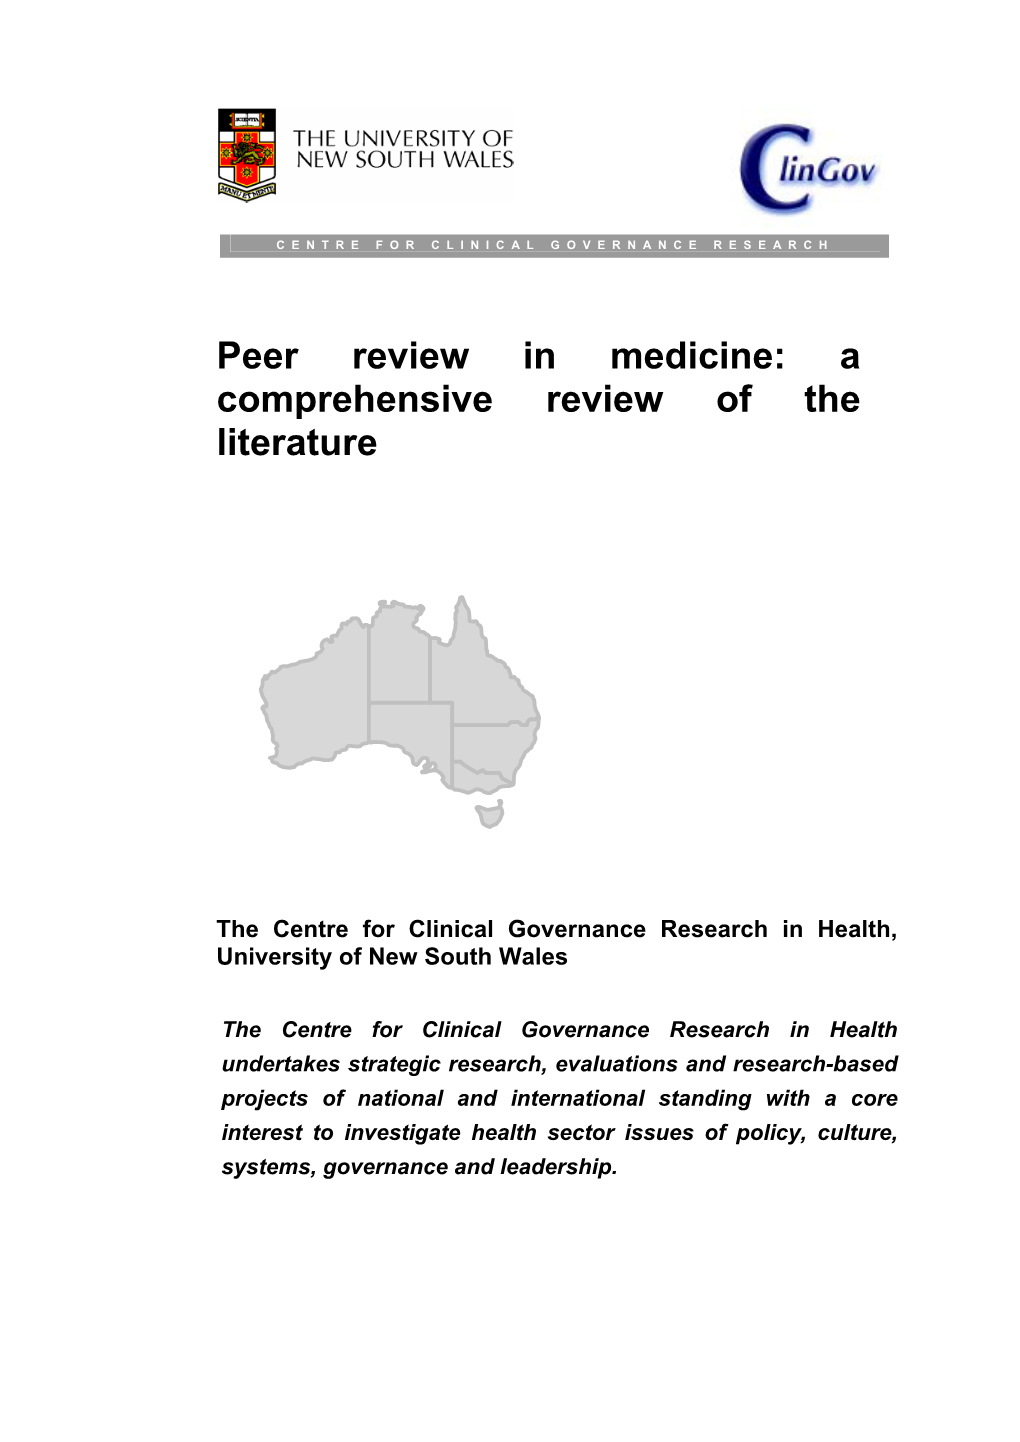 Peer Review in Medicine: a Comprehensive Review of the Literature